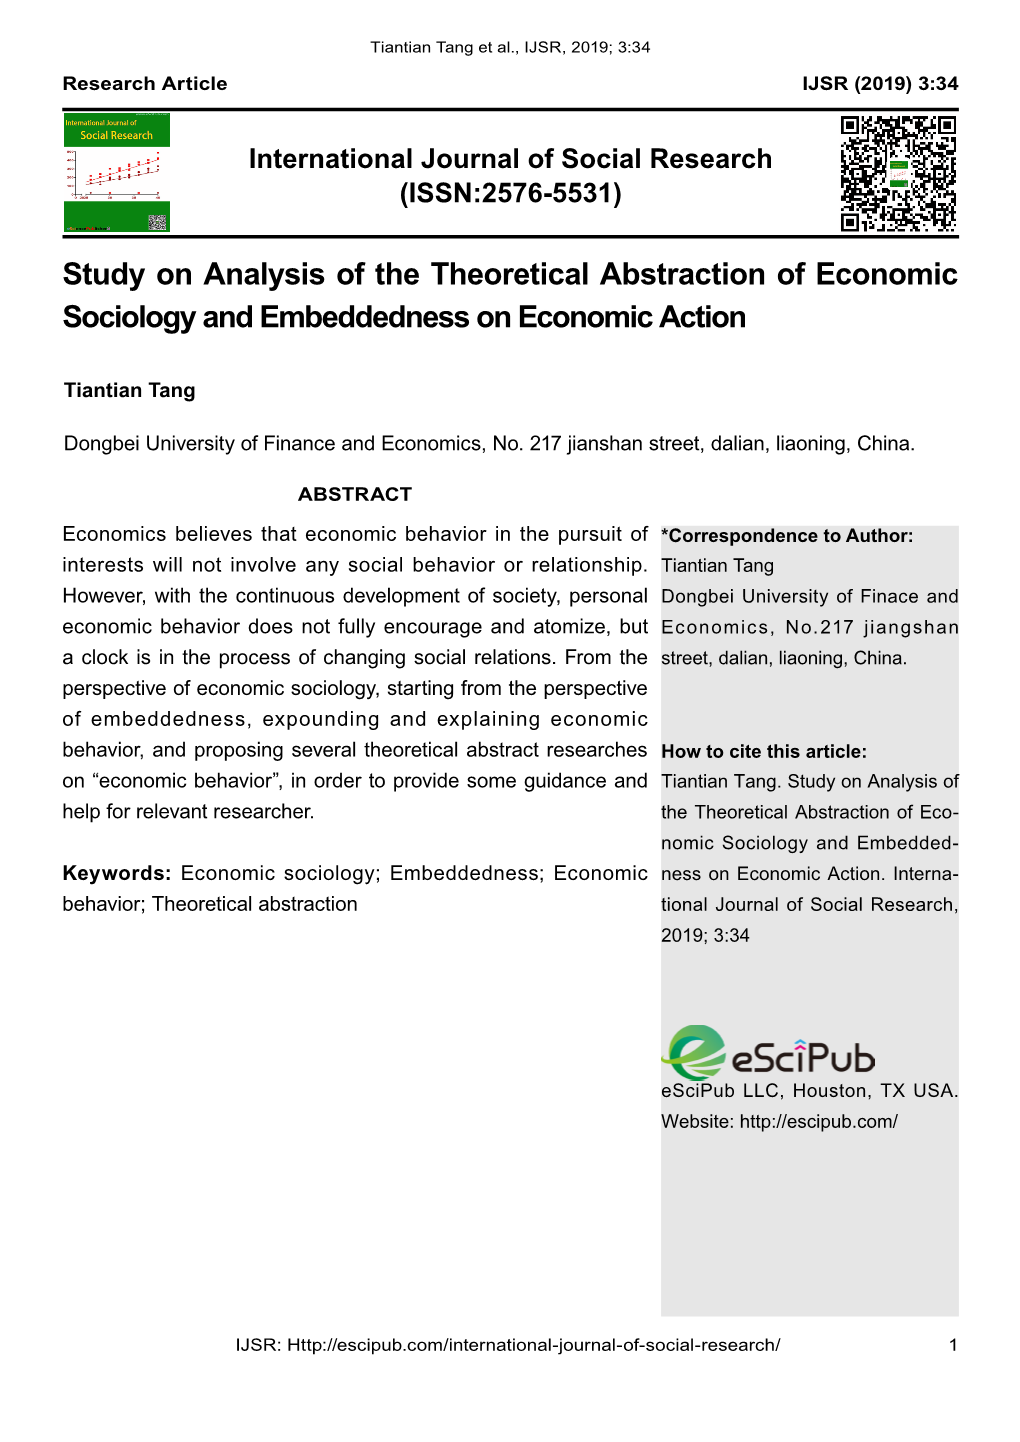 Study on Analysis of the Theoretical Abstraction of Economic Sociology and Embeddedness on Economic Action